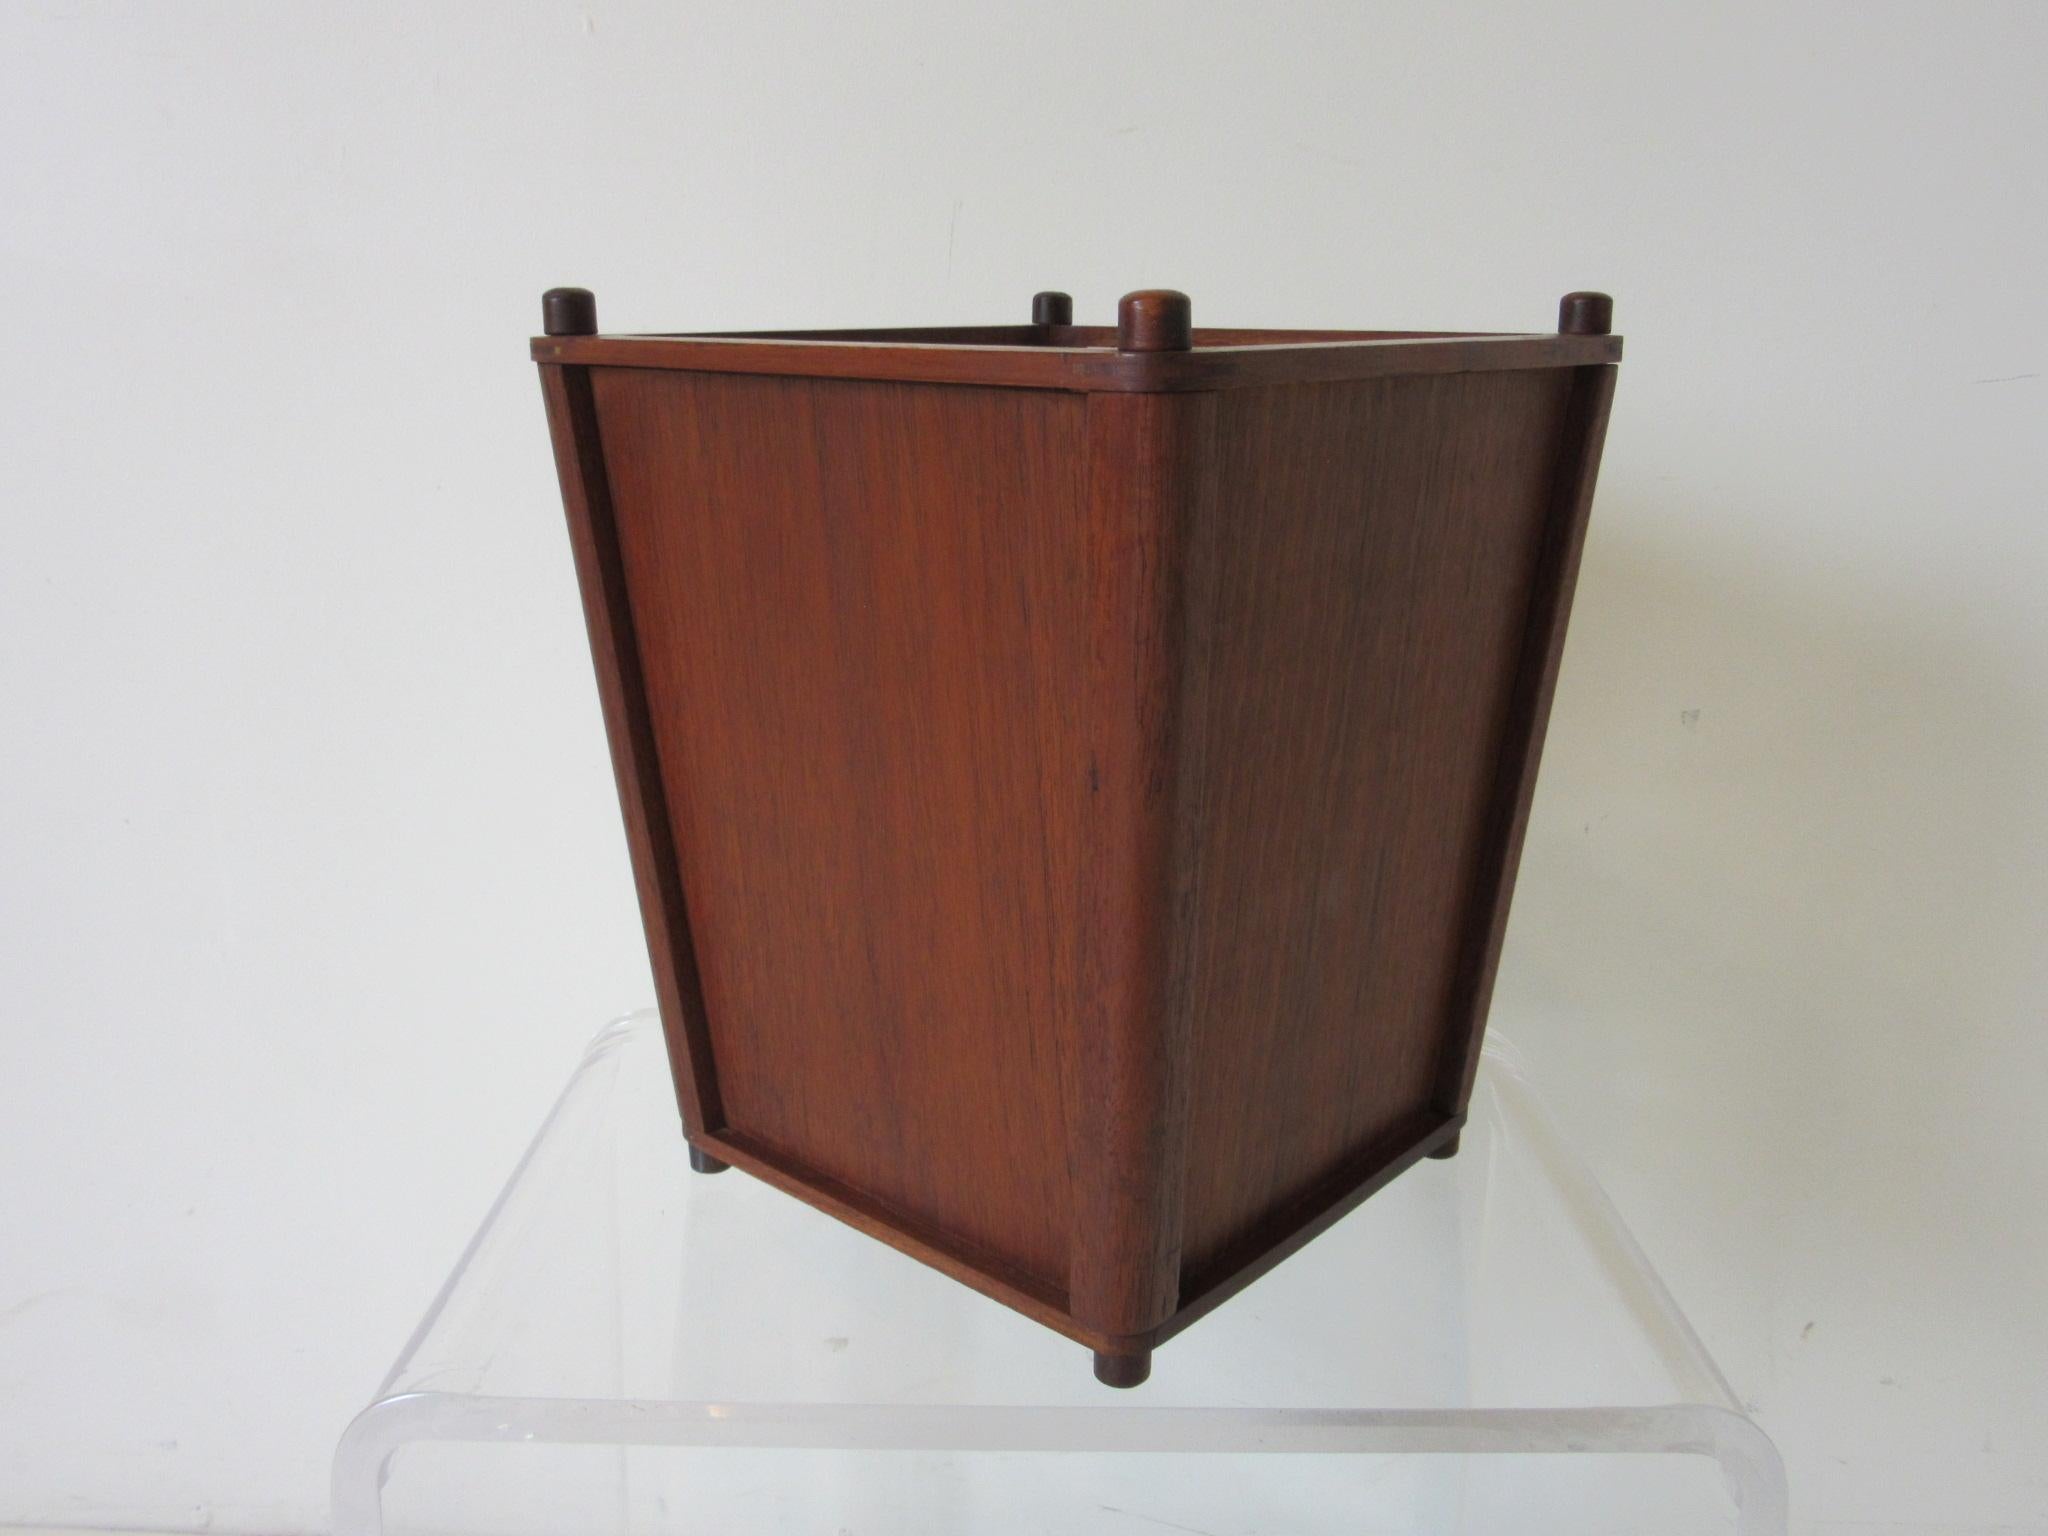 A nice sized and very useful teak wood waste basket with great graining, tapered sides, small feet and detailed pieces to the top. Always the last item which is hard to source to complement that Danish desk and chair to finish off your office design